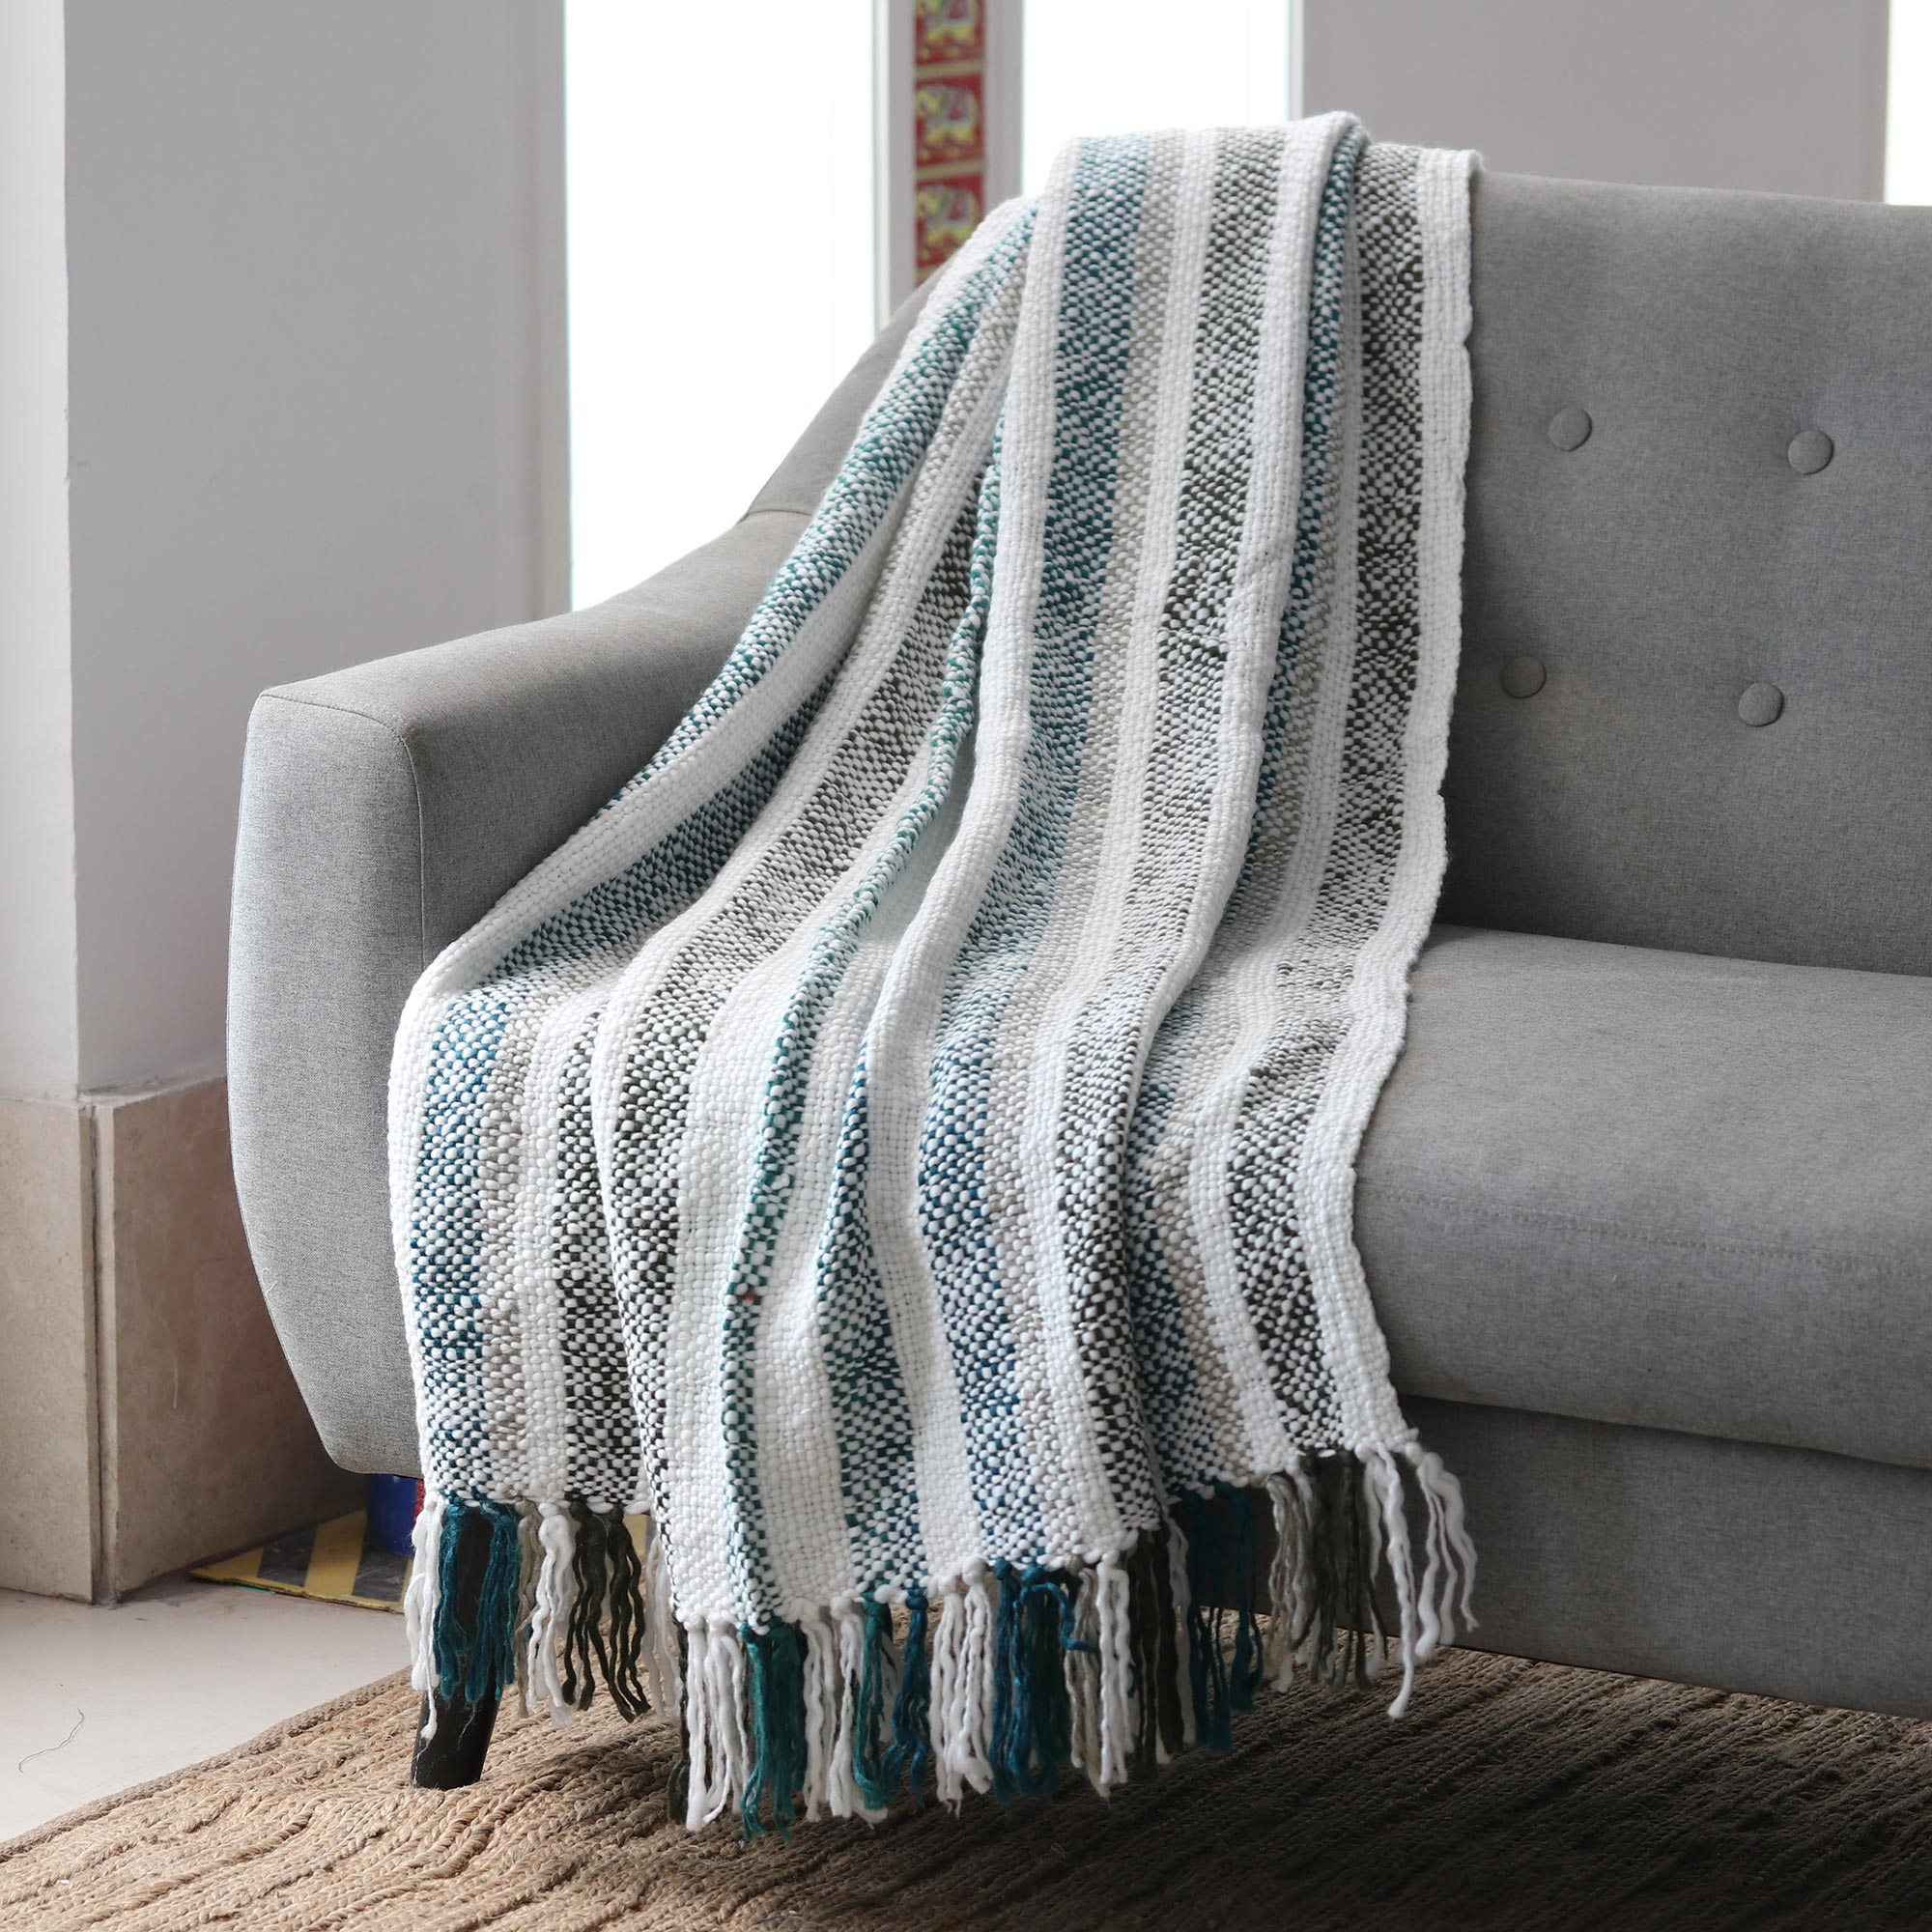 Indian Striped Throw Blanket - Teal Kiss | NOVICA